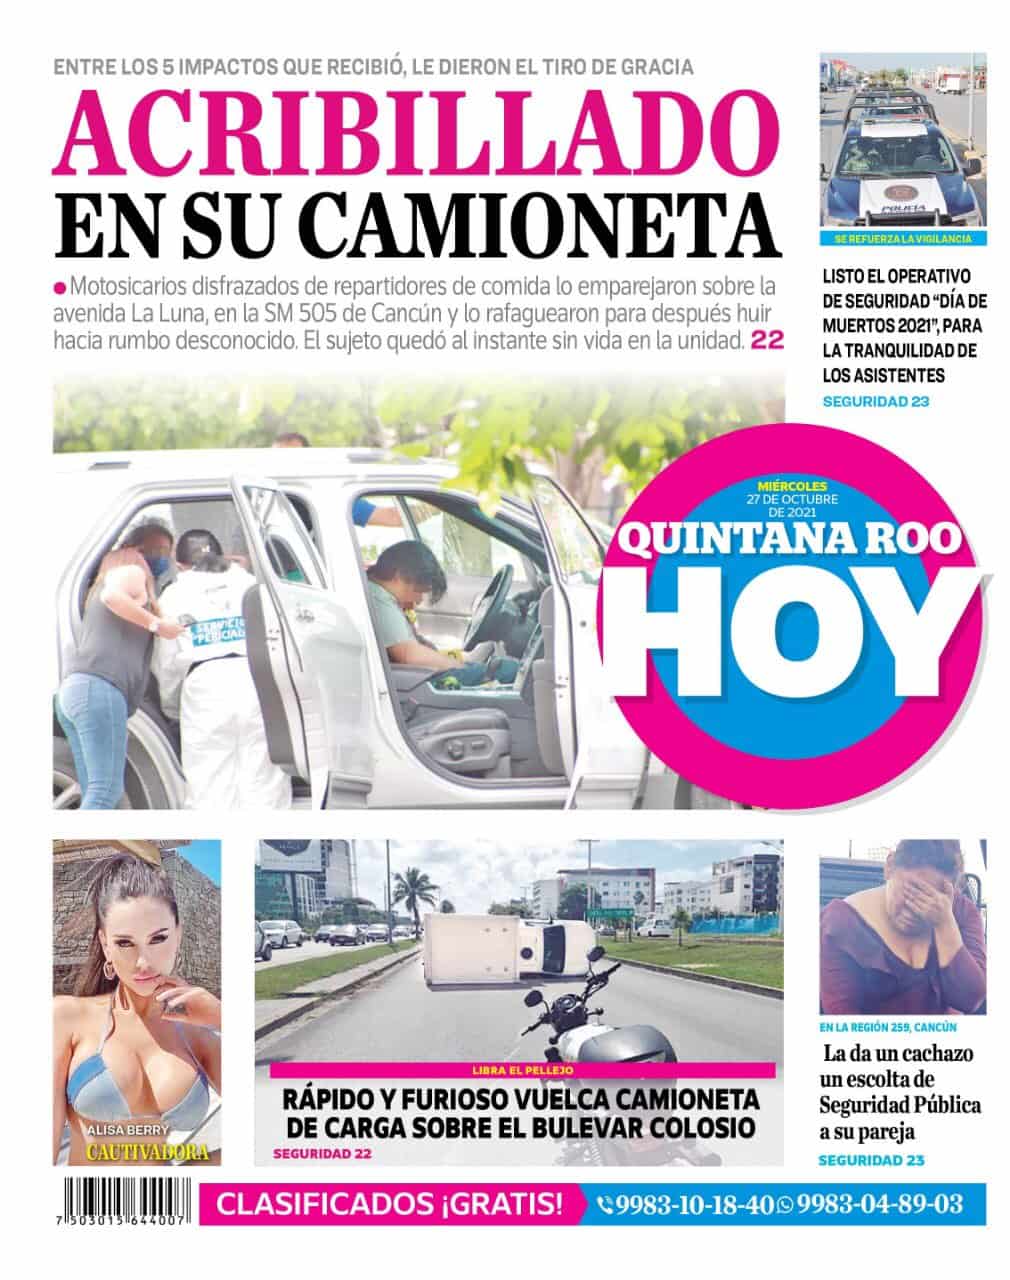 Motorcyclists disguised as food deliverymen shot a man in SM 505 in Cancun.